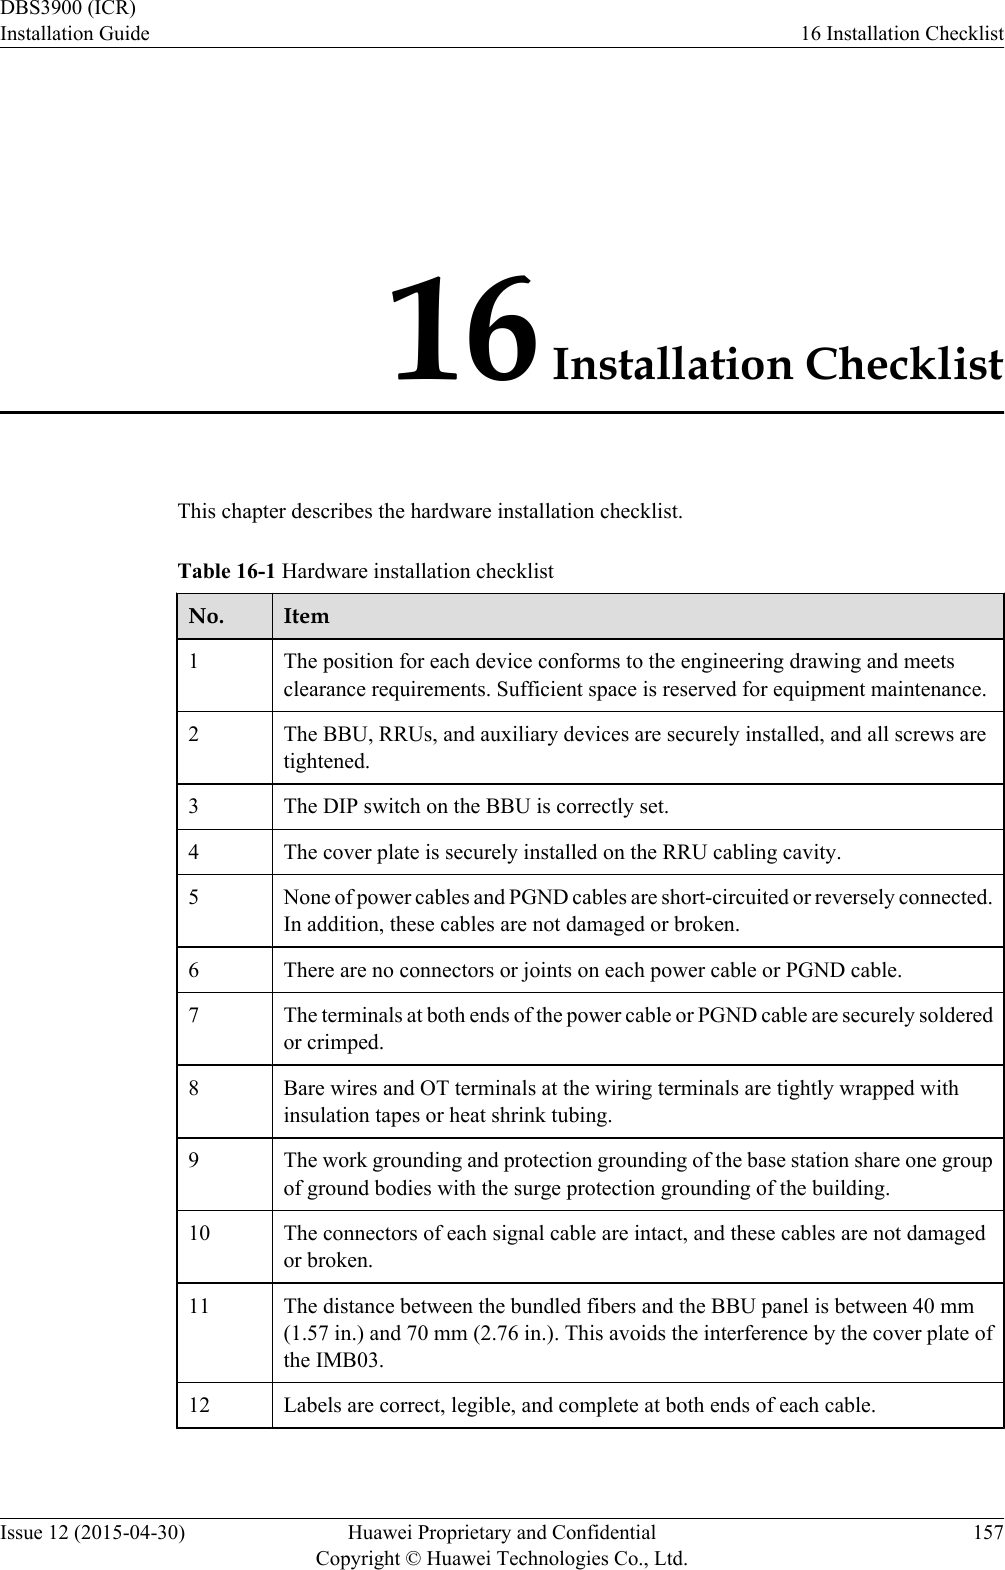 16 Installation ChecklistThis chapter describes the hardware installation checklist.Table 16-1 Hardware installation checklistNo. Item1The position for each device conforms to the engineering drawing and meetsclearance requirements. Sufficient space is reserved for equipment maintenance.2 The BBU, RRUs, and auxiliary devices are securely installed, and all screws aretightened.3 The DIP switch on the BBU is correctly set.4 The cover plate is securely installed on the RRU cabling cavity.5 None of power cables and PGND cables are short-circuited or reversely connected.In addition, these cables are not damaged or broken.6 There are no connectors or joints on each power cable or PGND cable.7 The terminals at both ends of the power cable or PGND cable are securely solderedor crimped.8 Bare wires and OT terminals at the wiring terminals are tightly wrapped withinsulation tapes or heat shrink tubing.9 The work grounding and protection grounding of the base station share one groupof ground bodies with the surge protection grounding of the building.10 The connectors of each signal cable are intact, and these cables are not damagedor broken.11 The distance between the bundled fibers and the BBU panel is between 40 mm(1.57 in.) and 70 mm (2.76 in.). This avoids the interference by the cover plate ofthe IMB03.12 Labels are correct, legible, and complete at both ends of each cable.DBS3900 (ICR)Installation Guide 16 Installation ChecklistIssue 12 (2015-04-30) Huawei Proprietary and ConfidentialCopyright © Huawei Technologies Co., Ltd.157